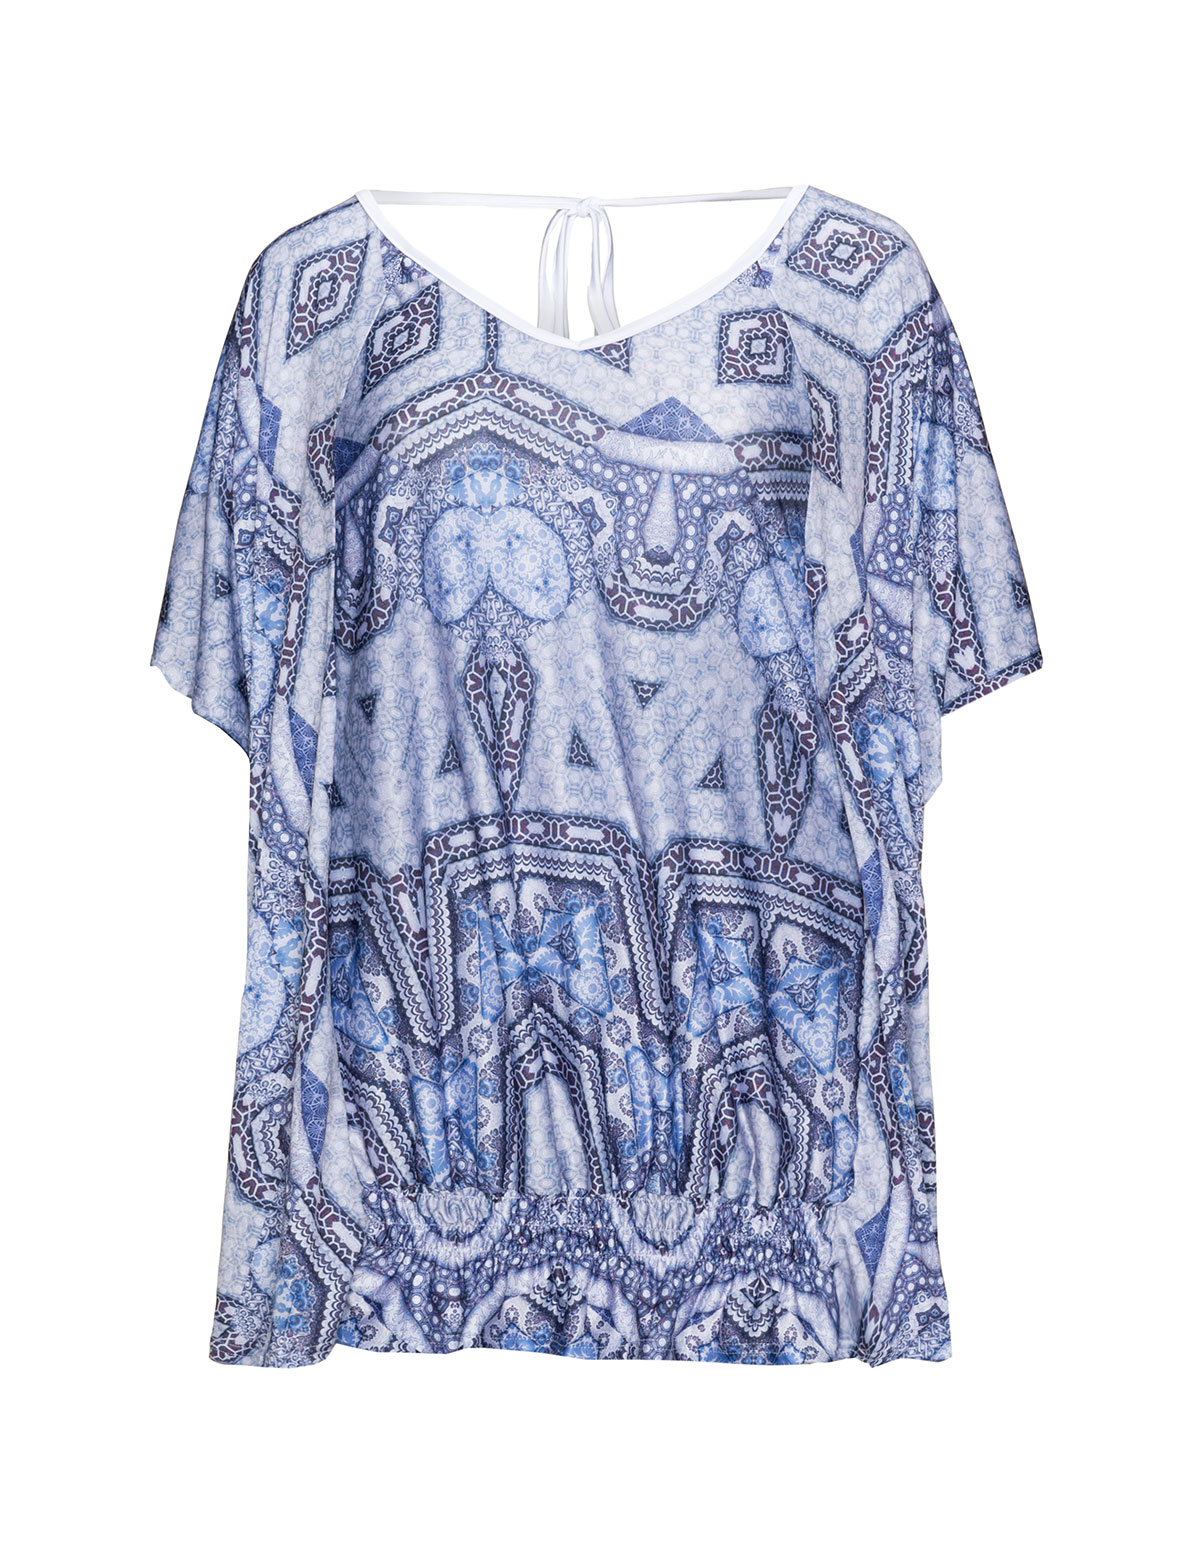 Printed tie back tunic by
Mat